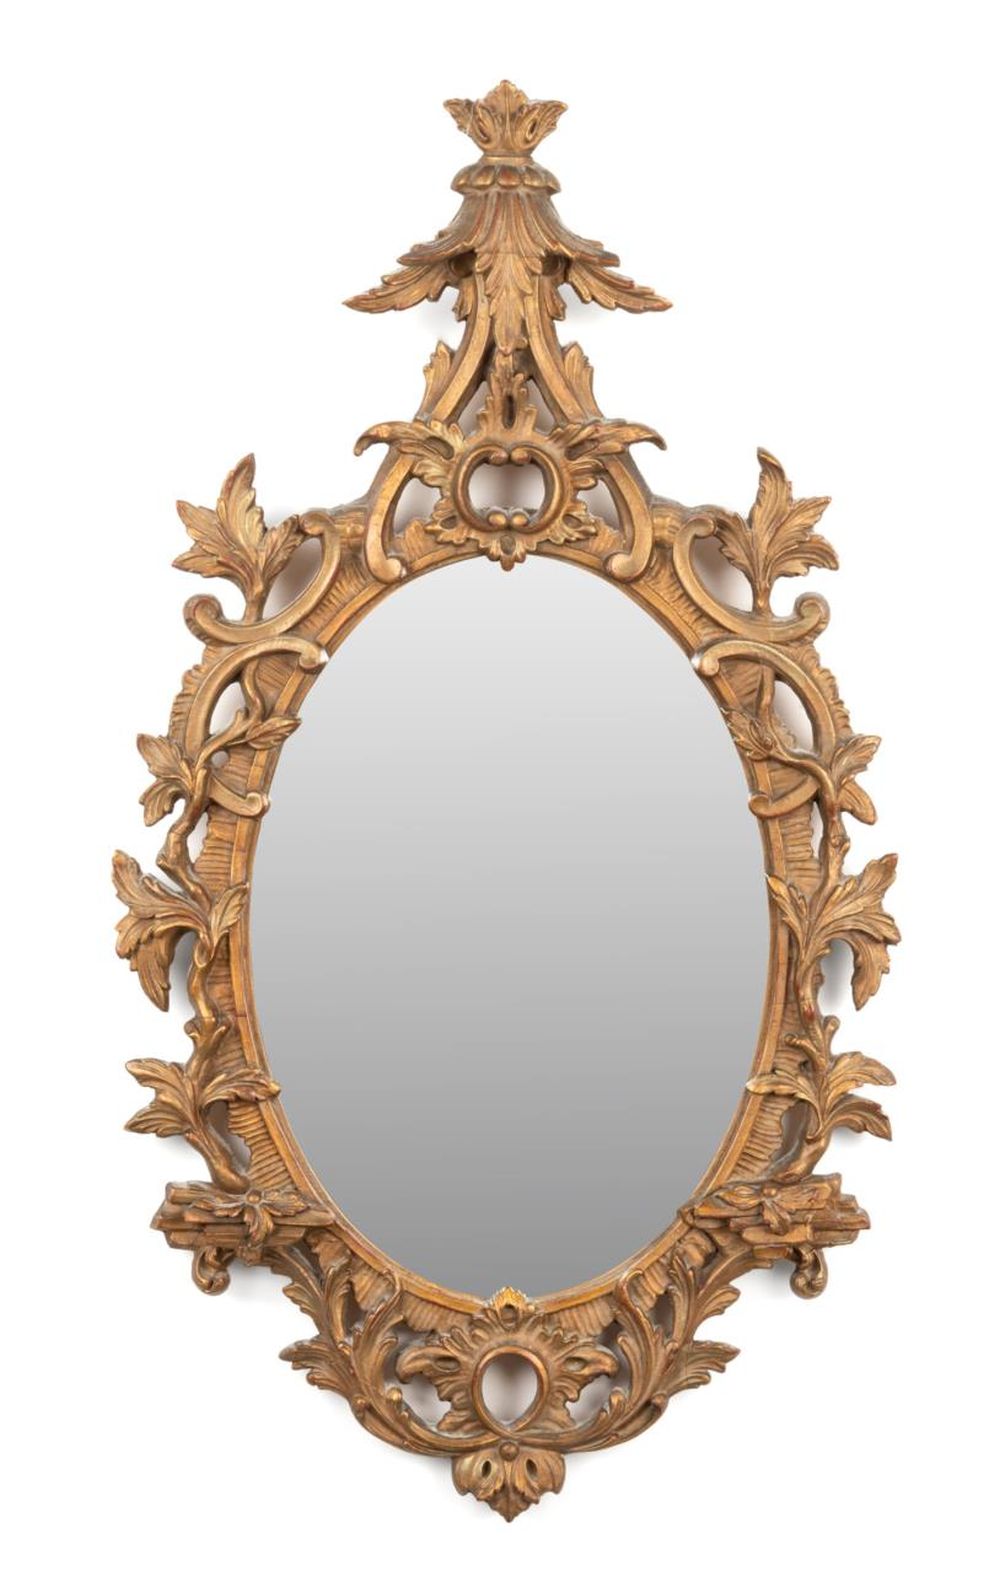 CHIPPENDALE STYLE CARVED OVAL MIRROR